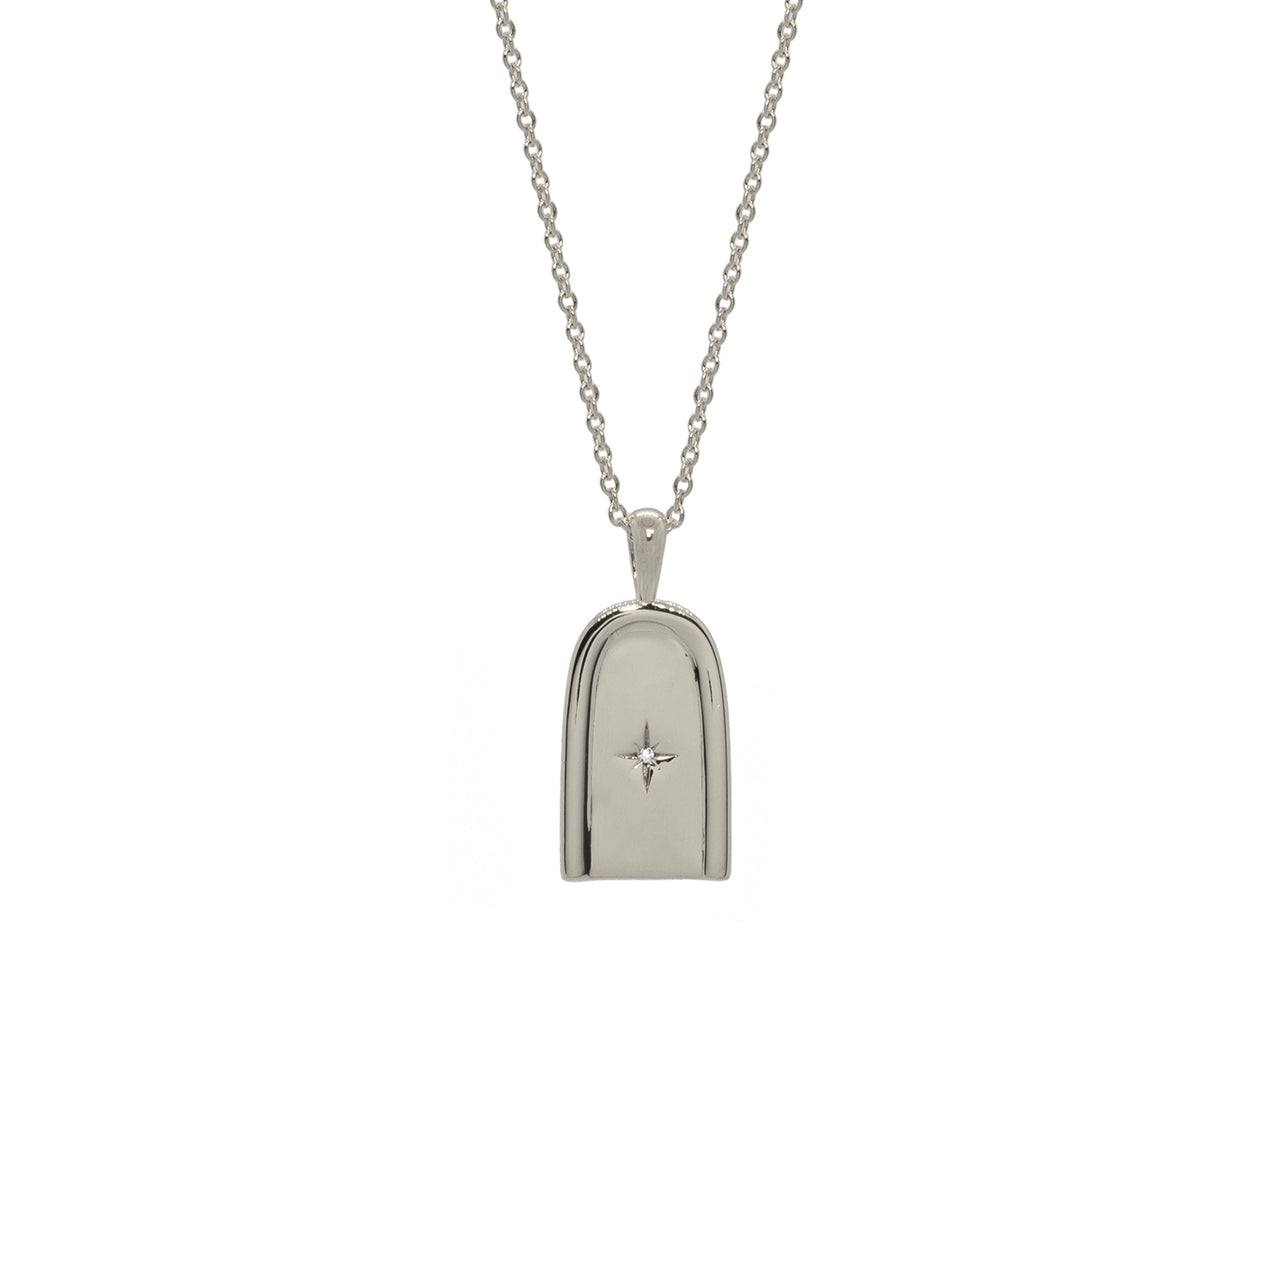 Louis Vuitton Dog Tag Pendant Necklace - Silver, Sterling Silver